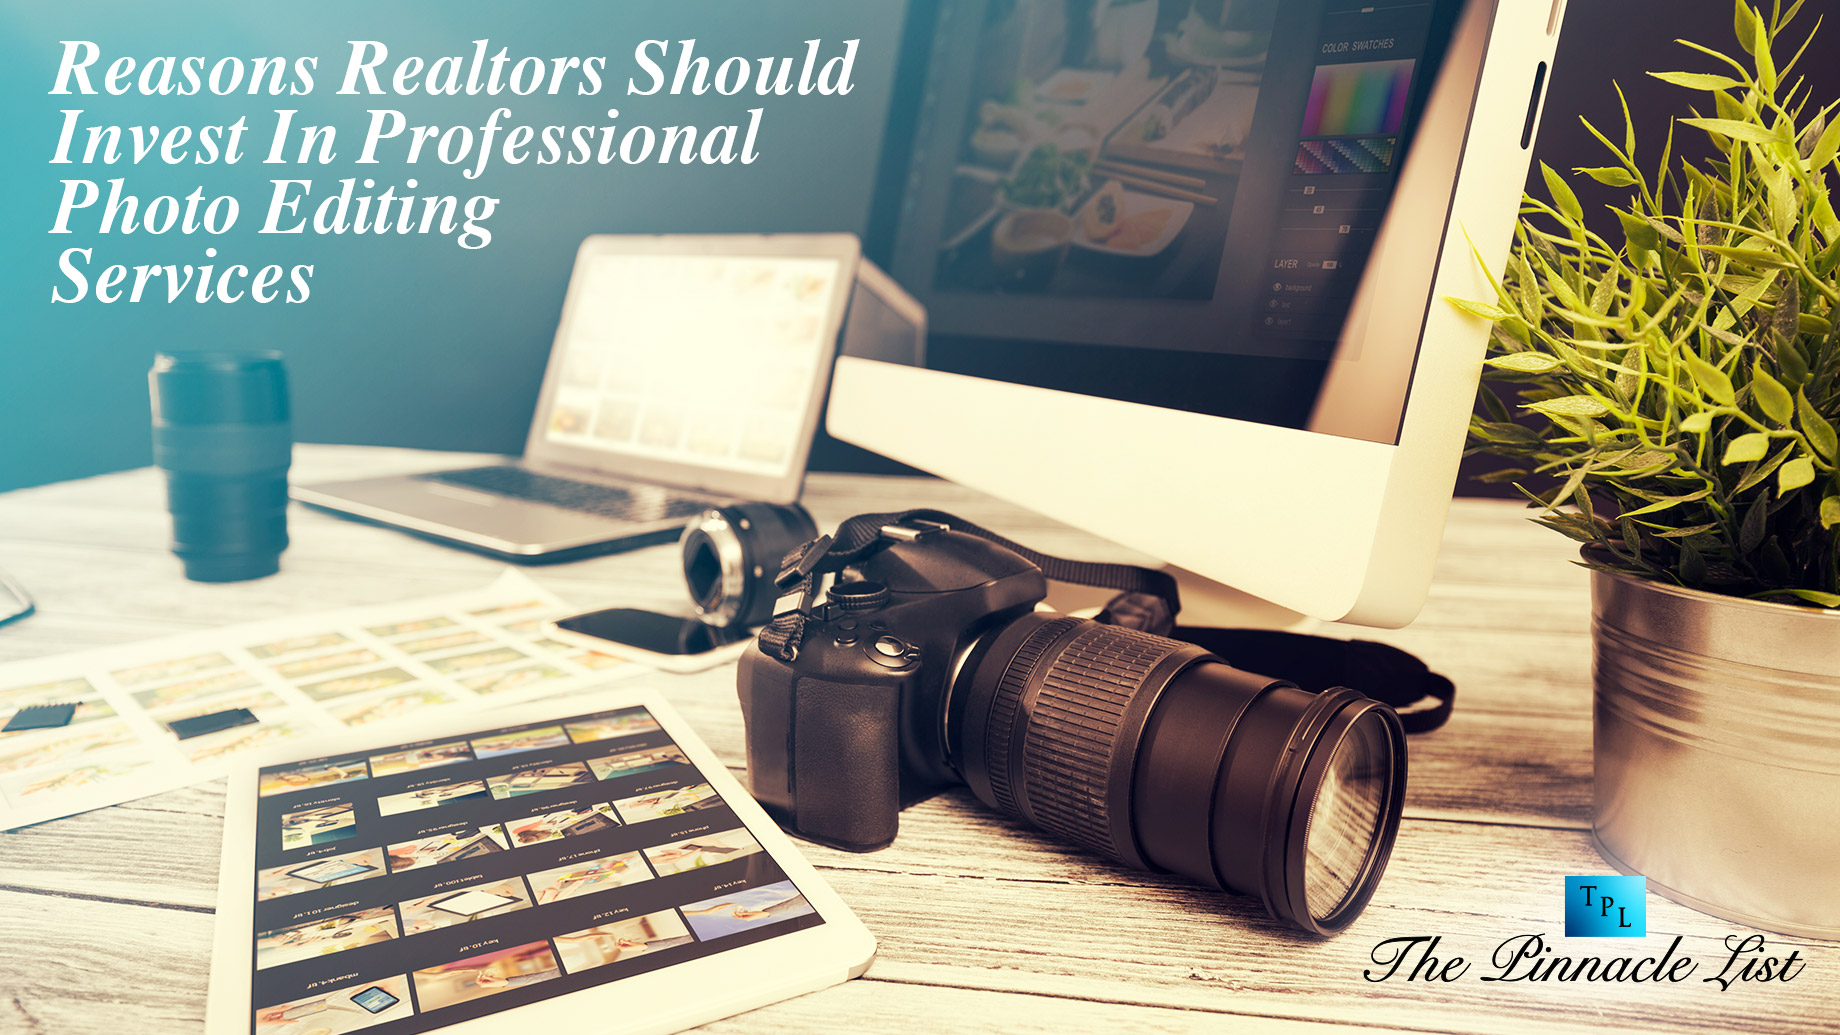 Reasons Realtors Should Invest In Professional Photo Editing Services